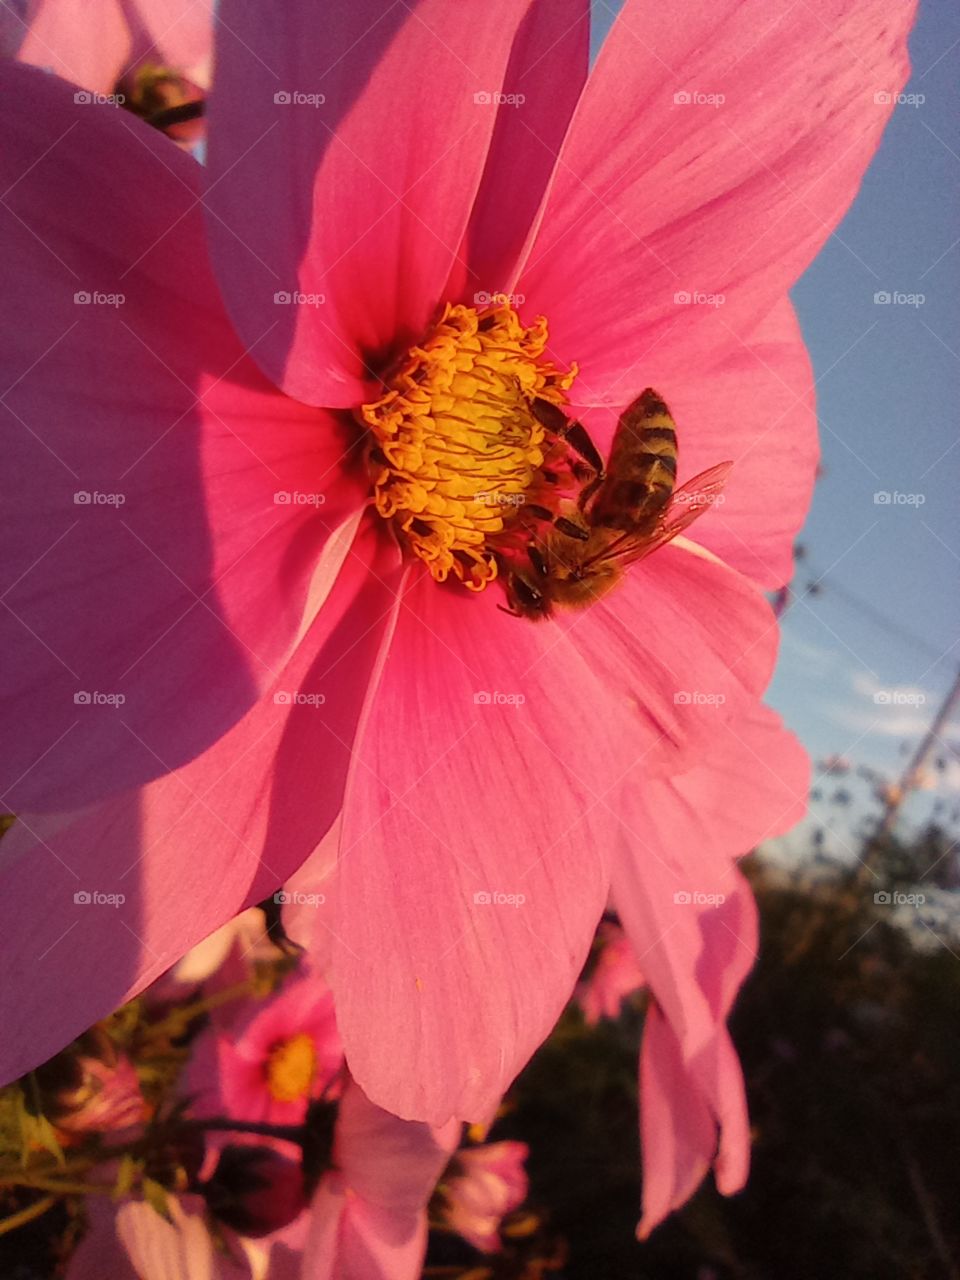 Harvesting in the autumn. A bee on a pink flower collecting nectar